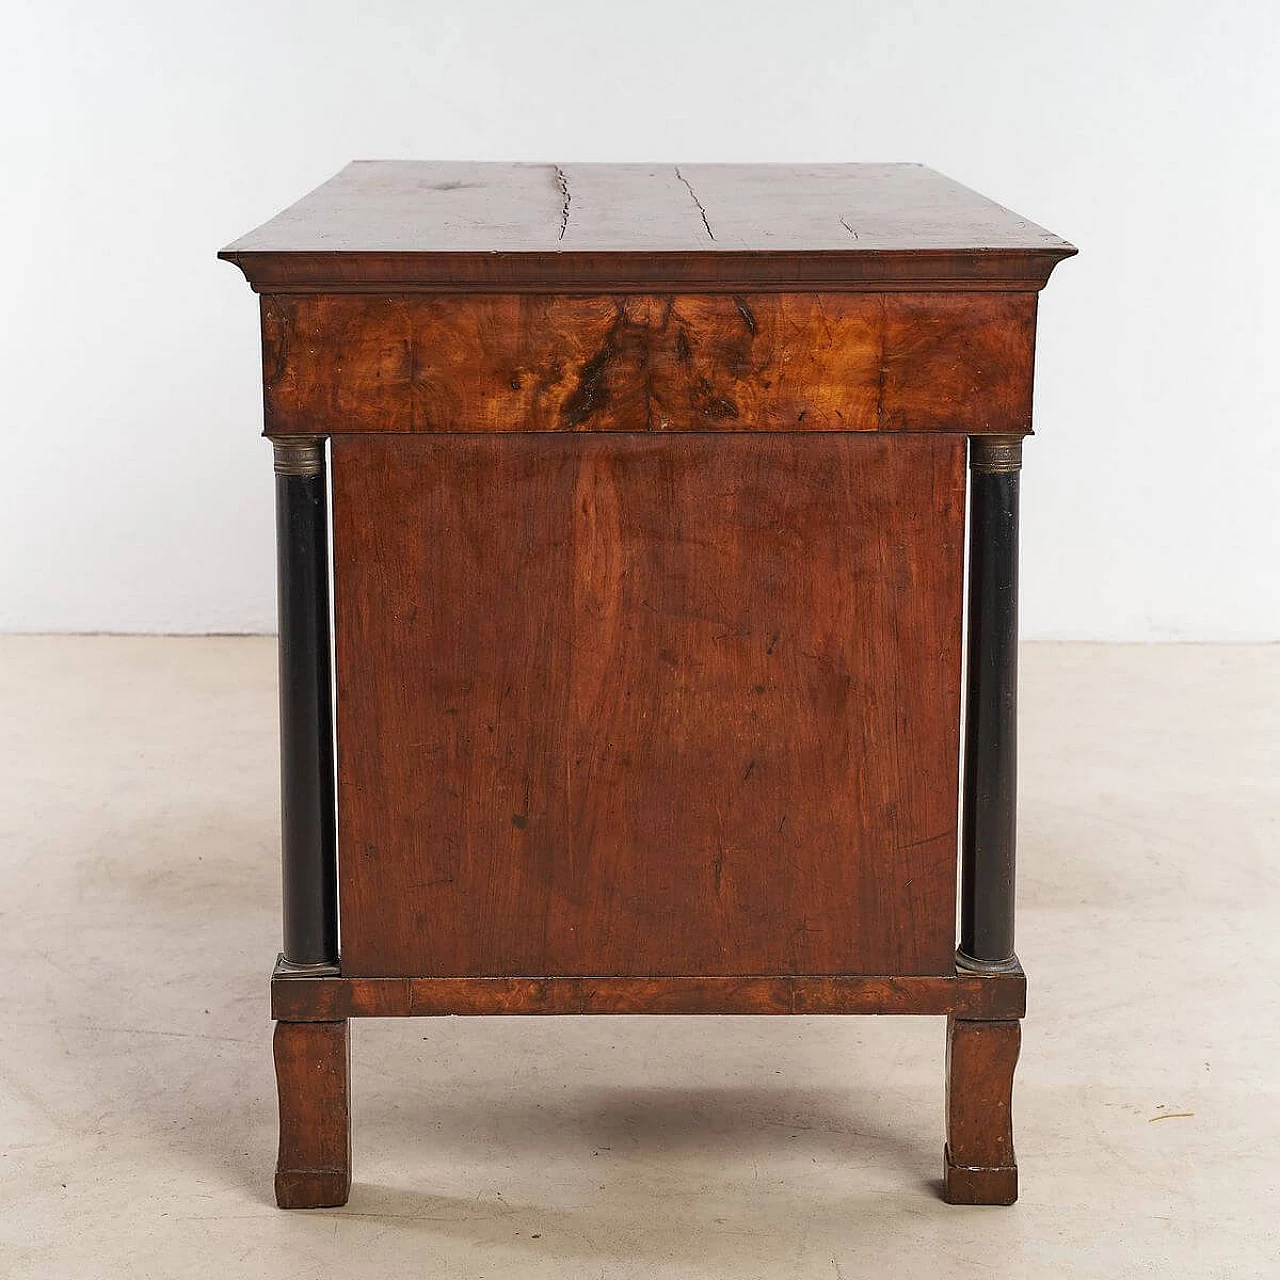 Empire-style panelled and inlaid wooden center desk, 19th century 14